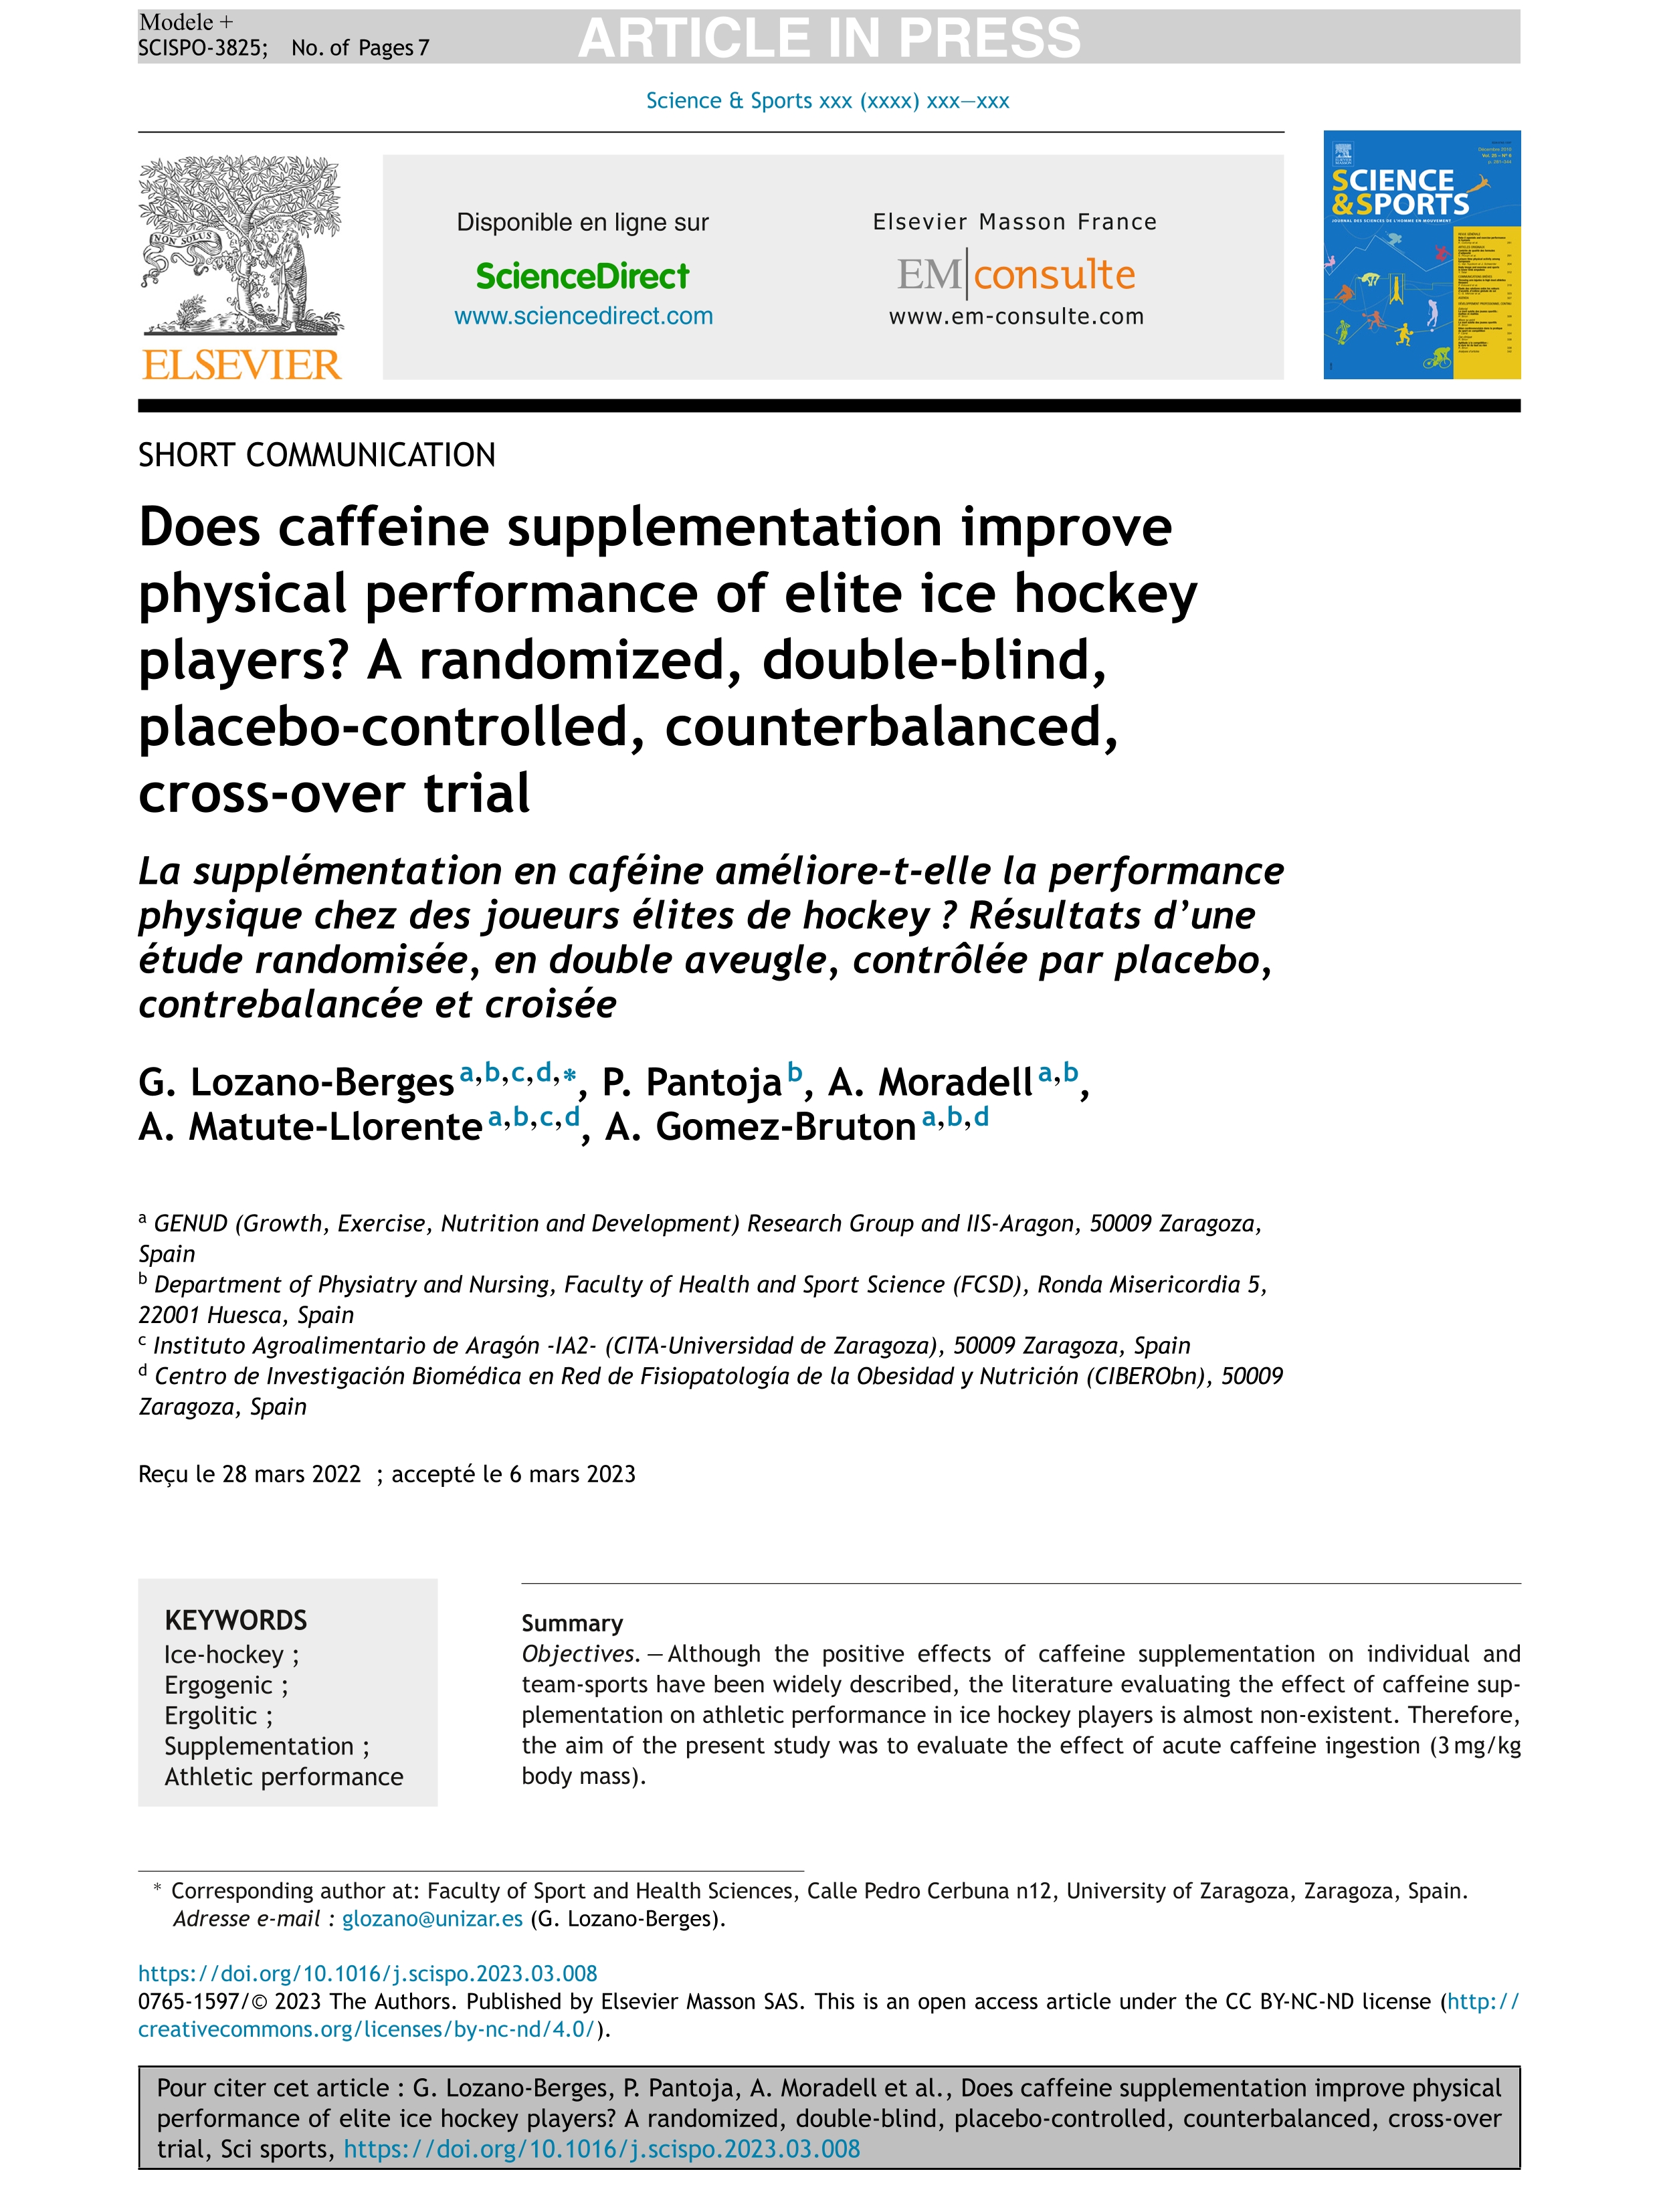 Does caffeine supplementation improve physical performance of elite ice hockey players?: A randomized, double-blind, placebo-controlled, counterbalanced, cross-over trial